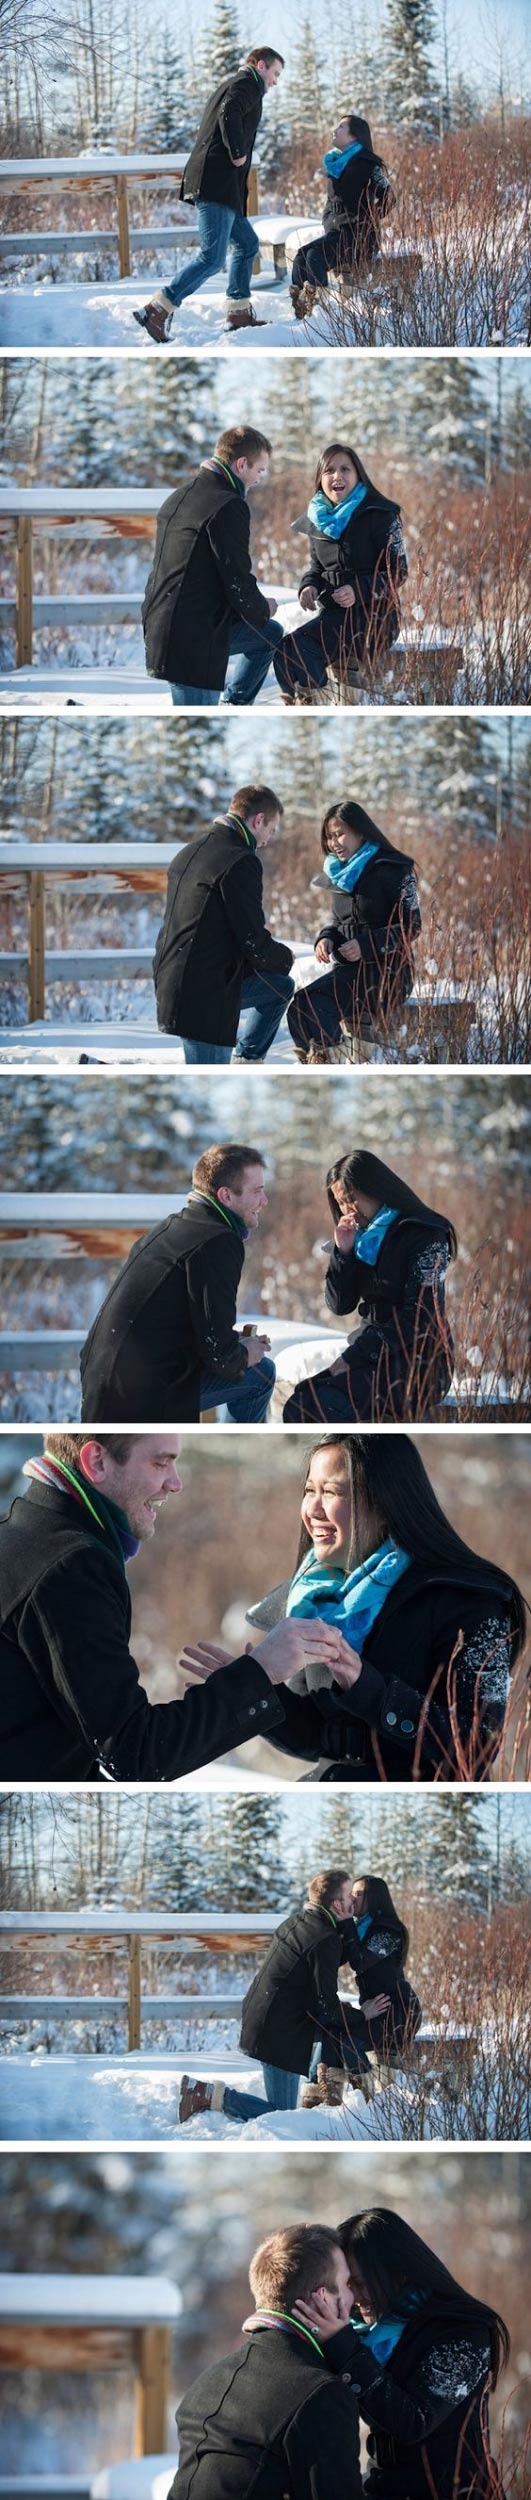 10 tips for truly stunning engagement photos - weddingfor1000.com